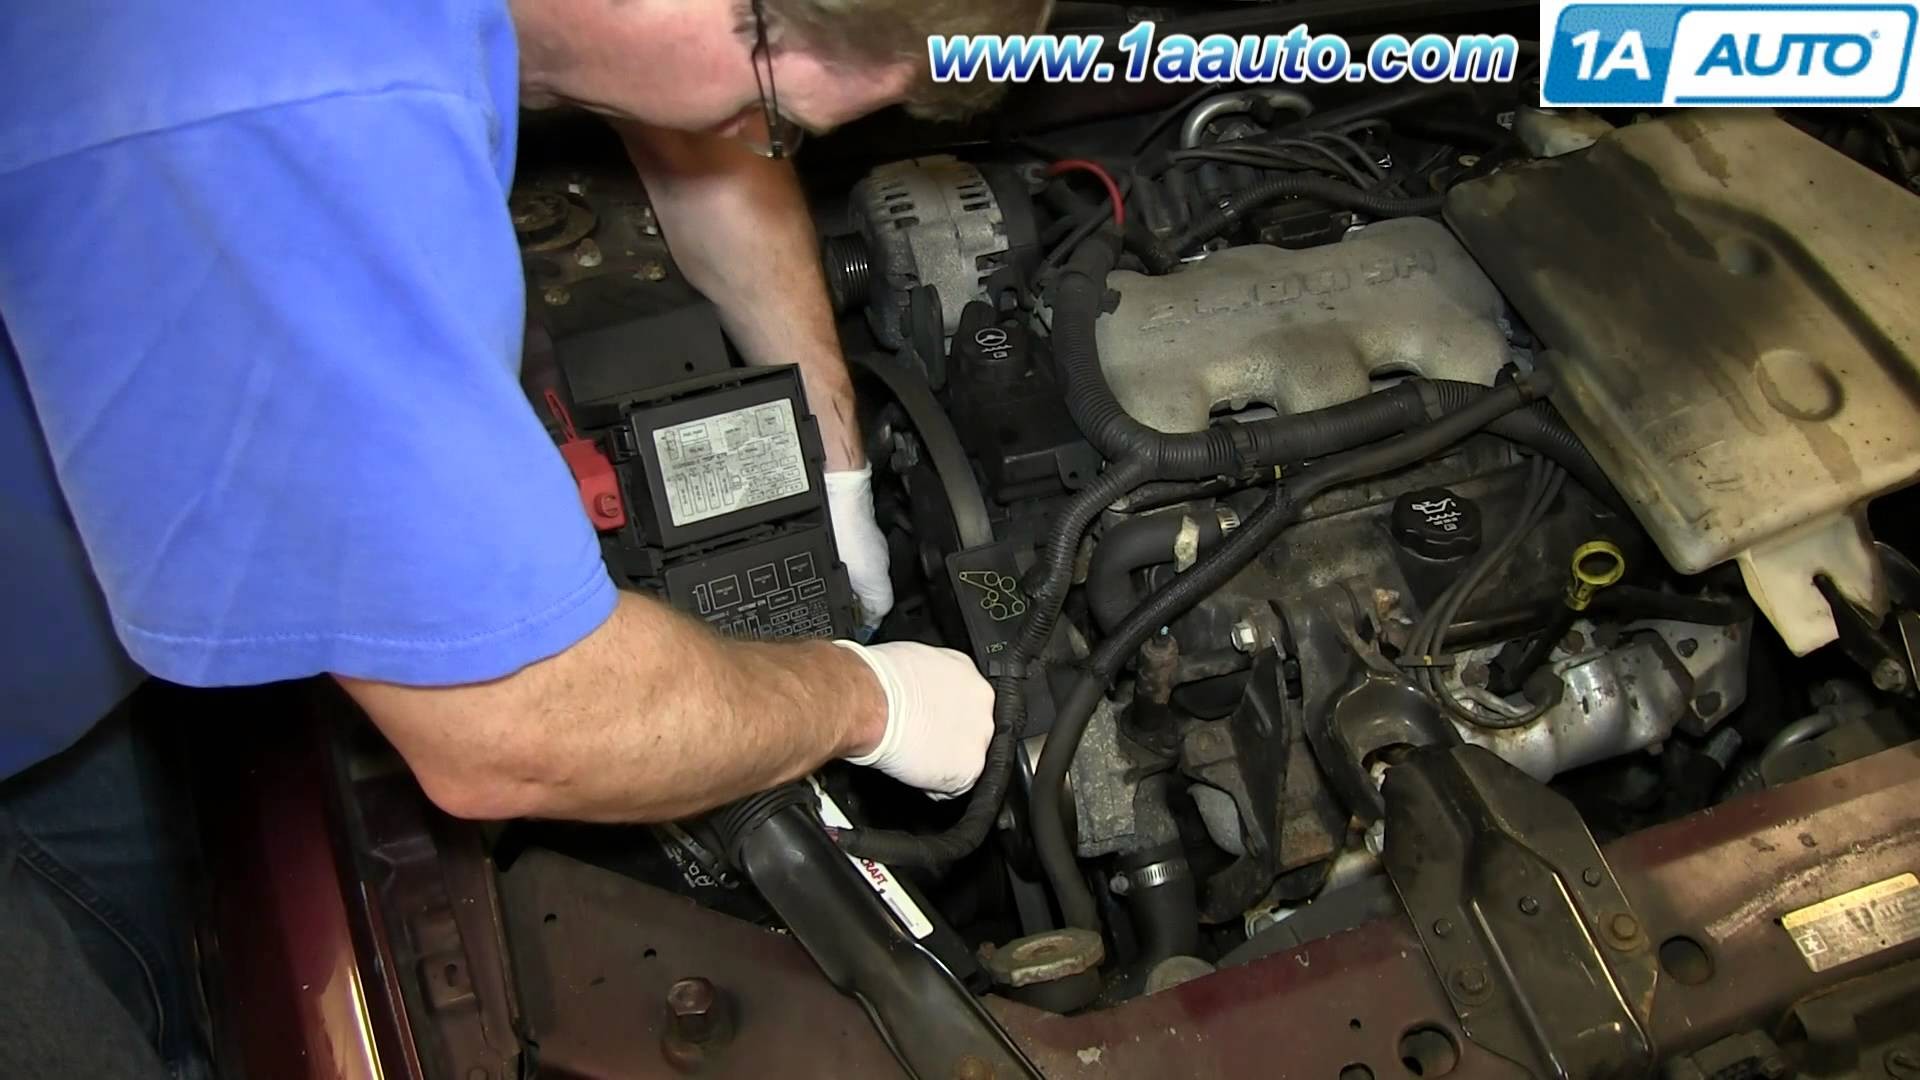 2000 Monte Carlo Engine Diagram How to Install Replace Serpentine Belt Tensioner 3 4l 2000 05 Chevy Of 2000 Monte Carlo Engine Diagram